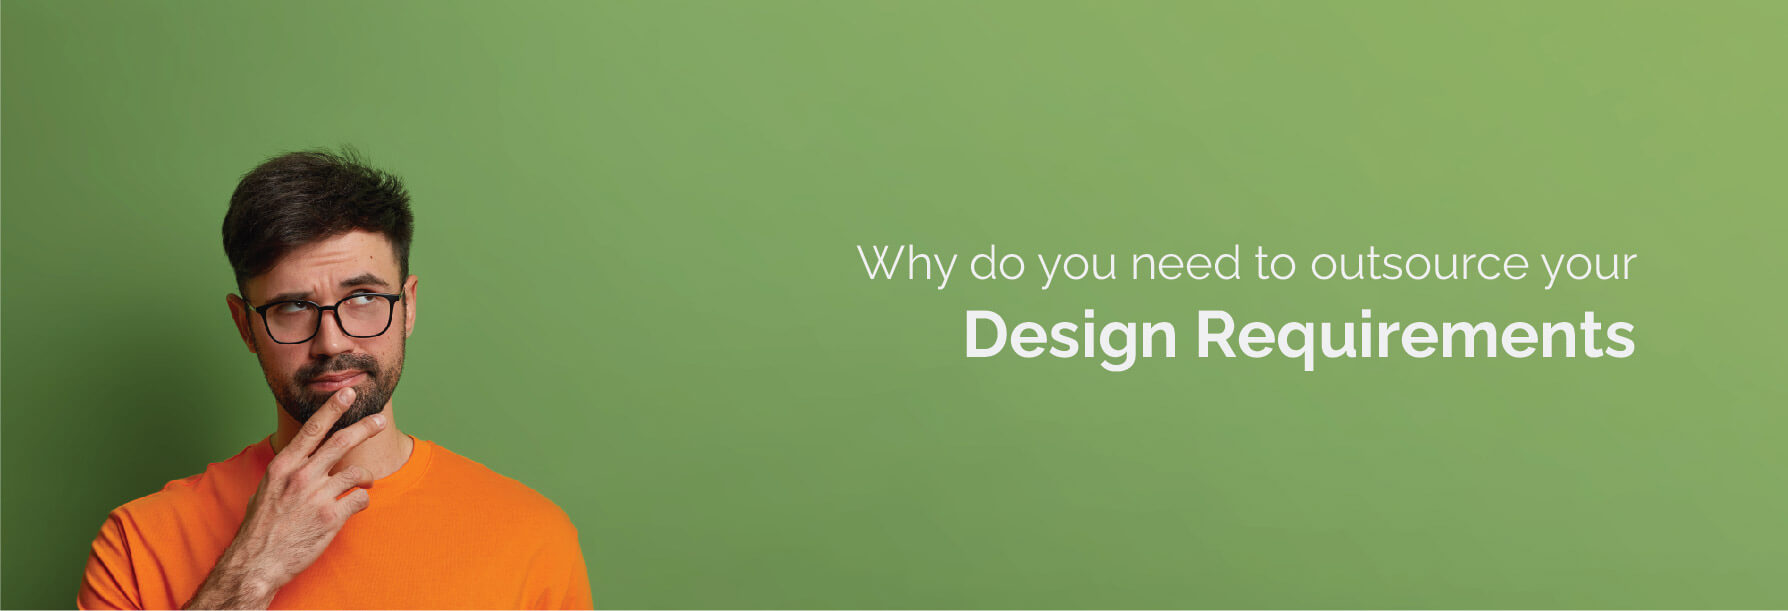 Why do you need to outsource your design requirements?